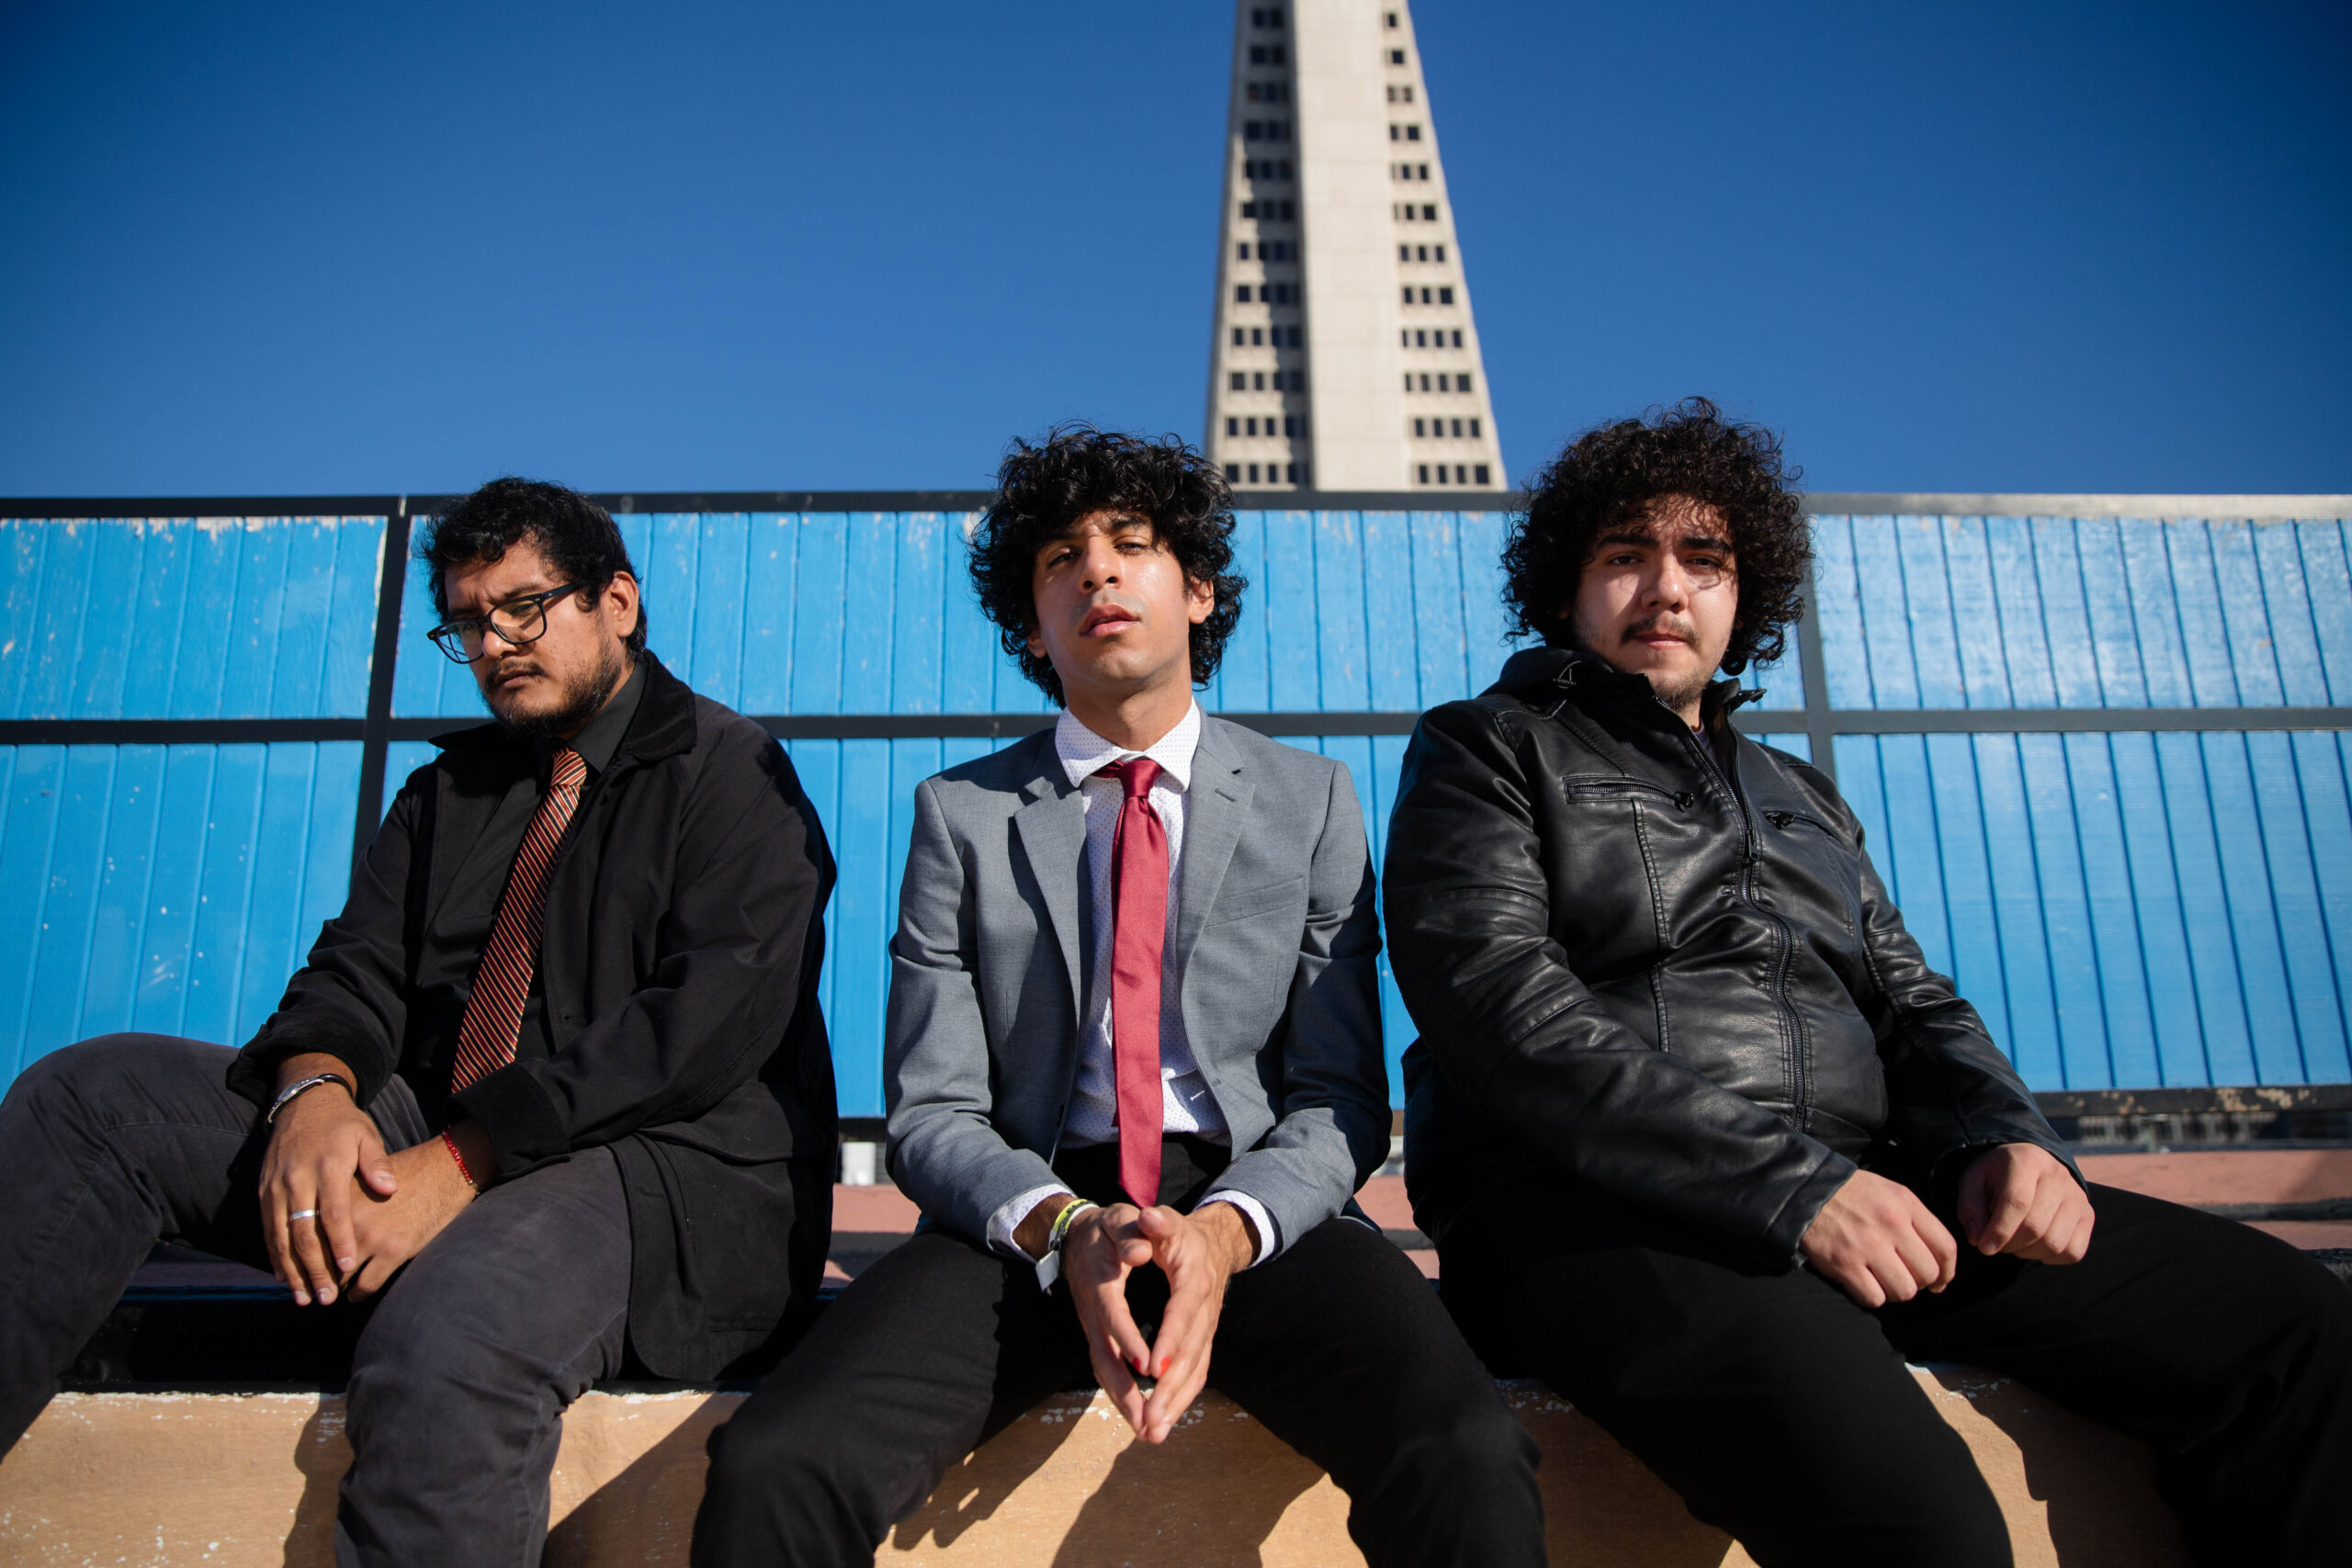 The Red Pears Arrive With <i>You Thought We Left</i>